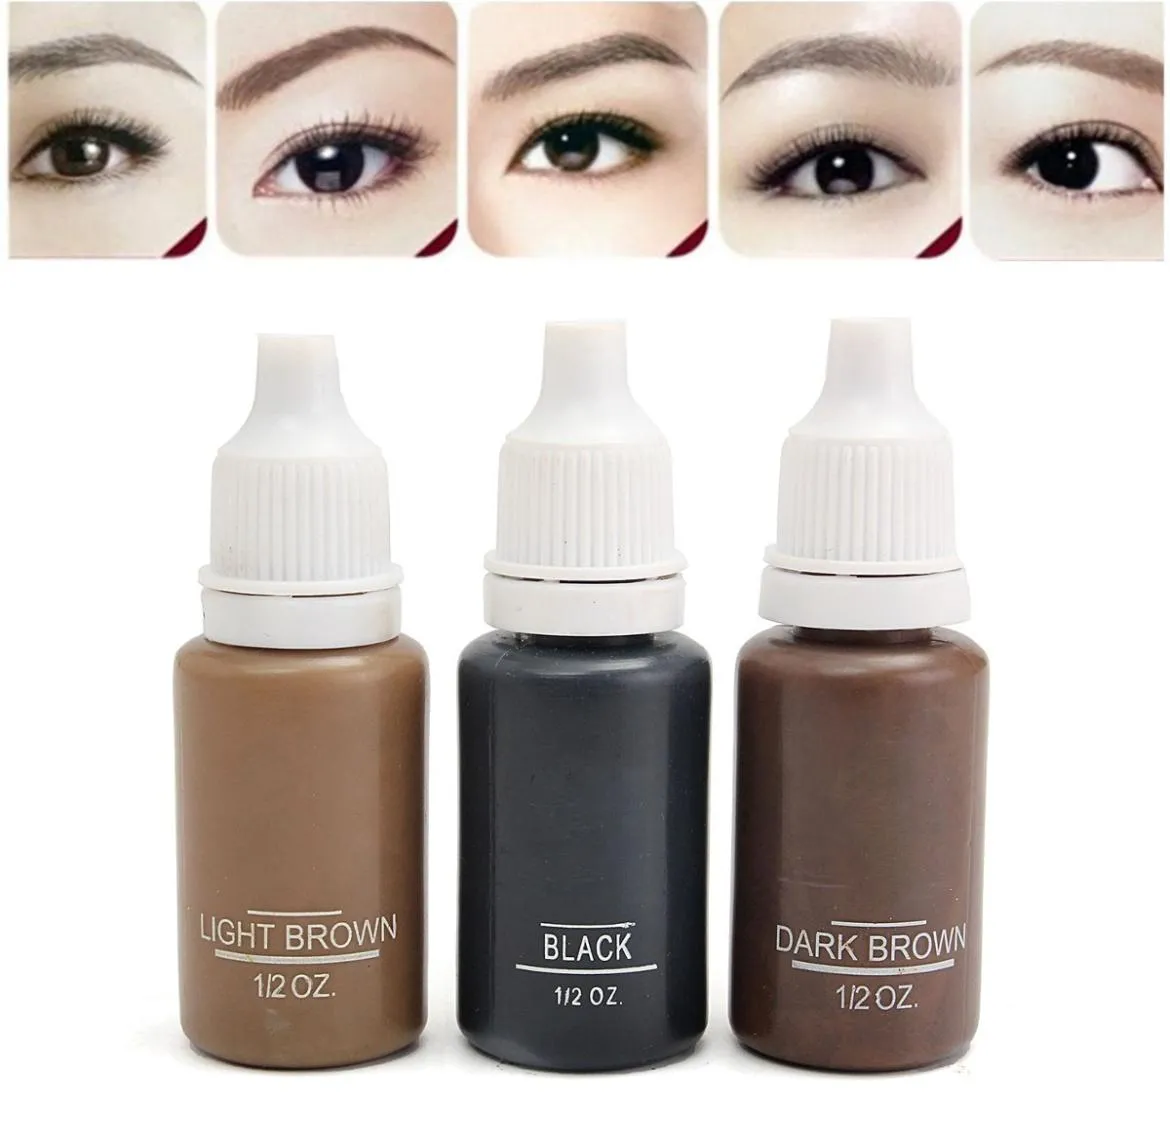 Whole 3Pcslot Tattoo Ink 3 Different Colors For Permanent Makeup Tattooing Eyebrow Eyeliner Lip 15ml Cosmetic Manual Paint P6714237